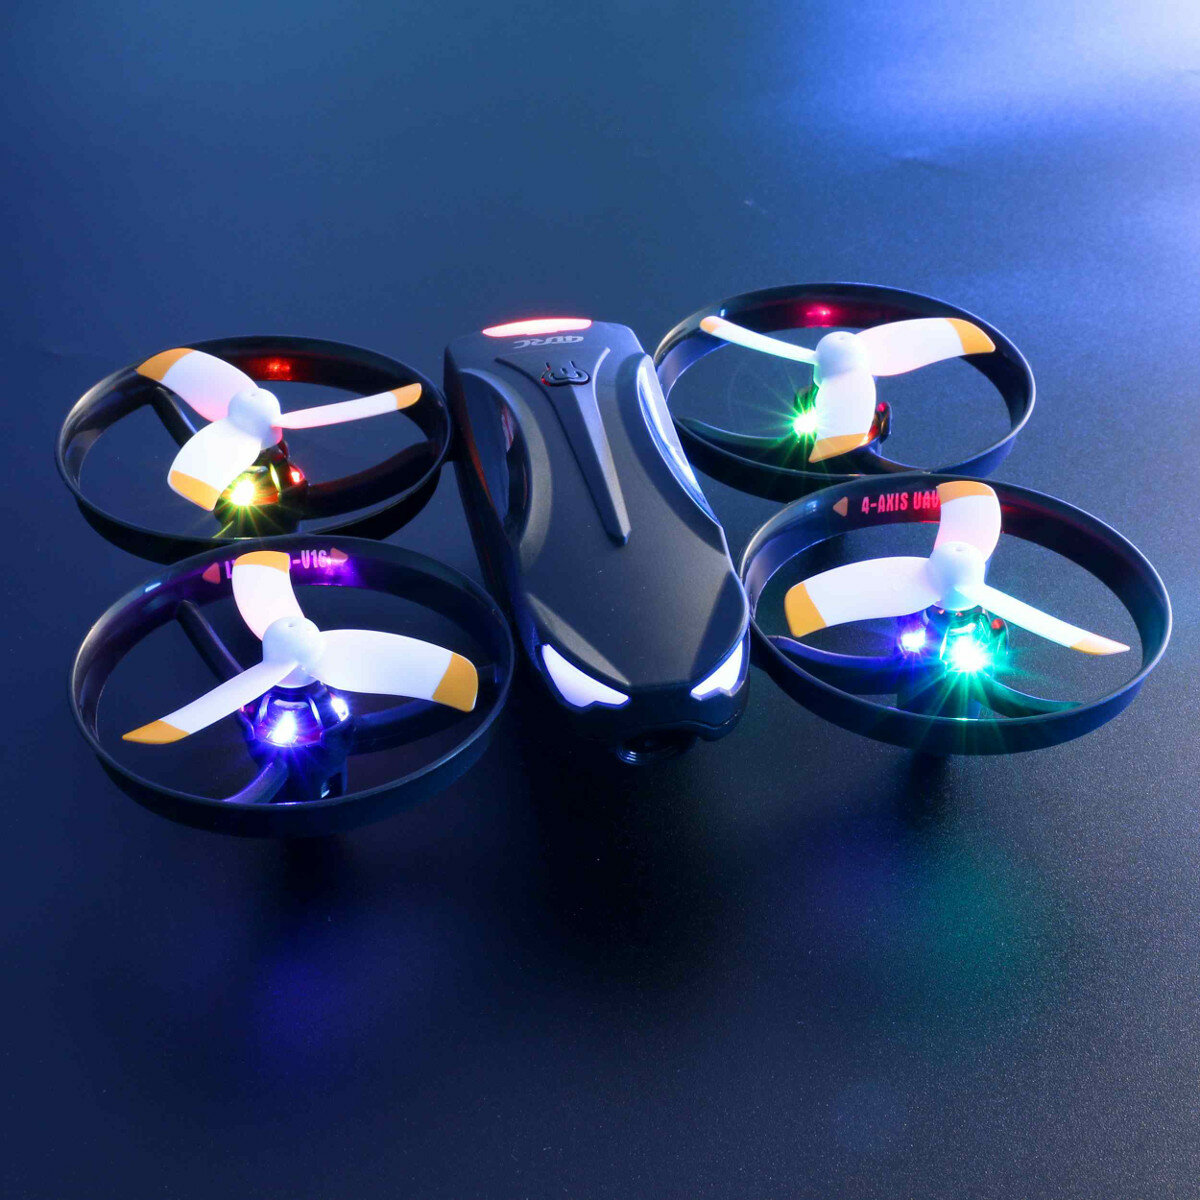 4DRC V16 WiFi FPV with 6K HD 50x ZOOM Dual Camera 20mins Flight Time Altitude Hold Mode LED Colorful RC Drone Quadcopter